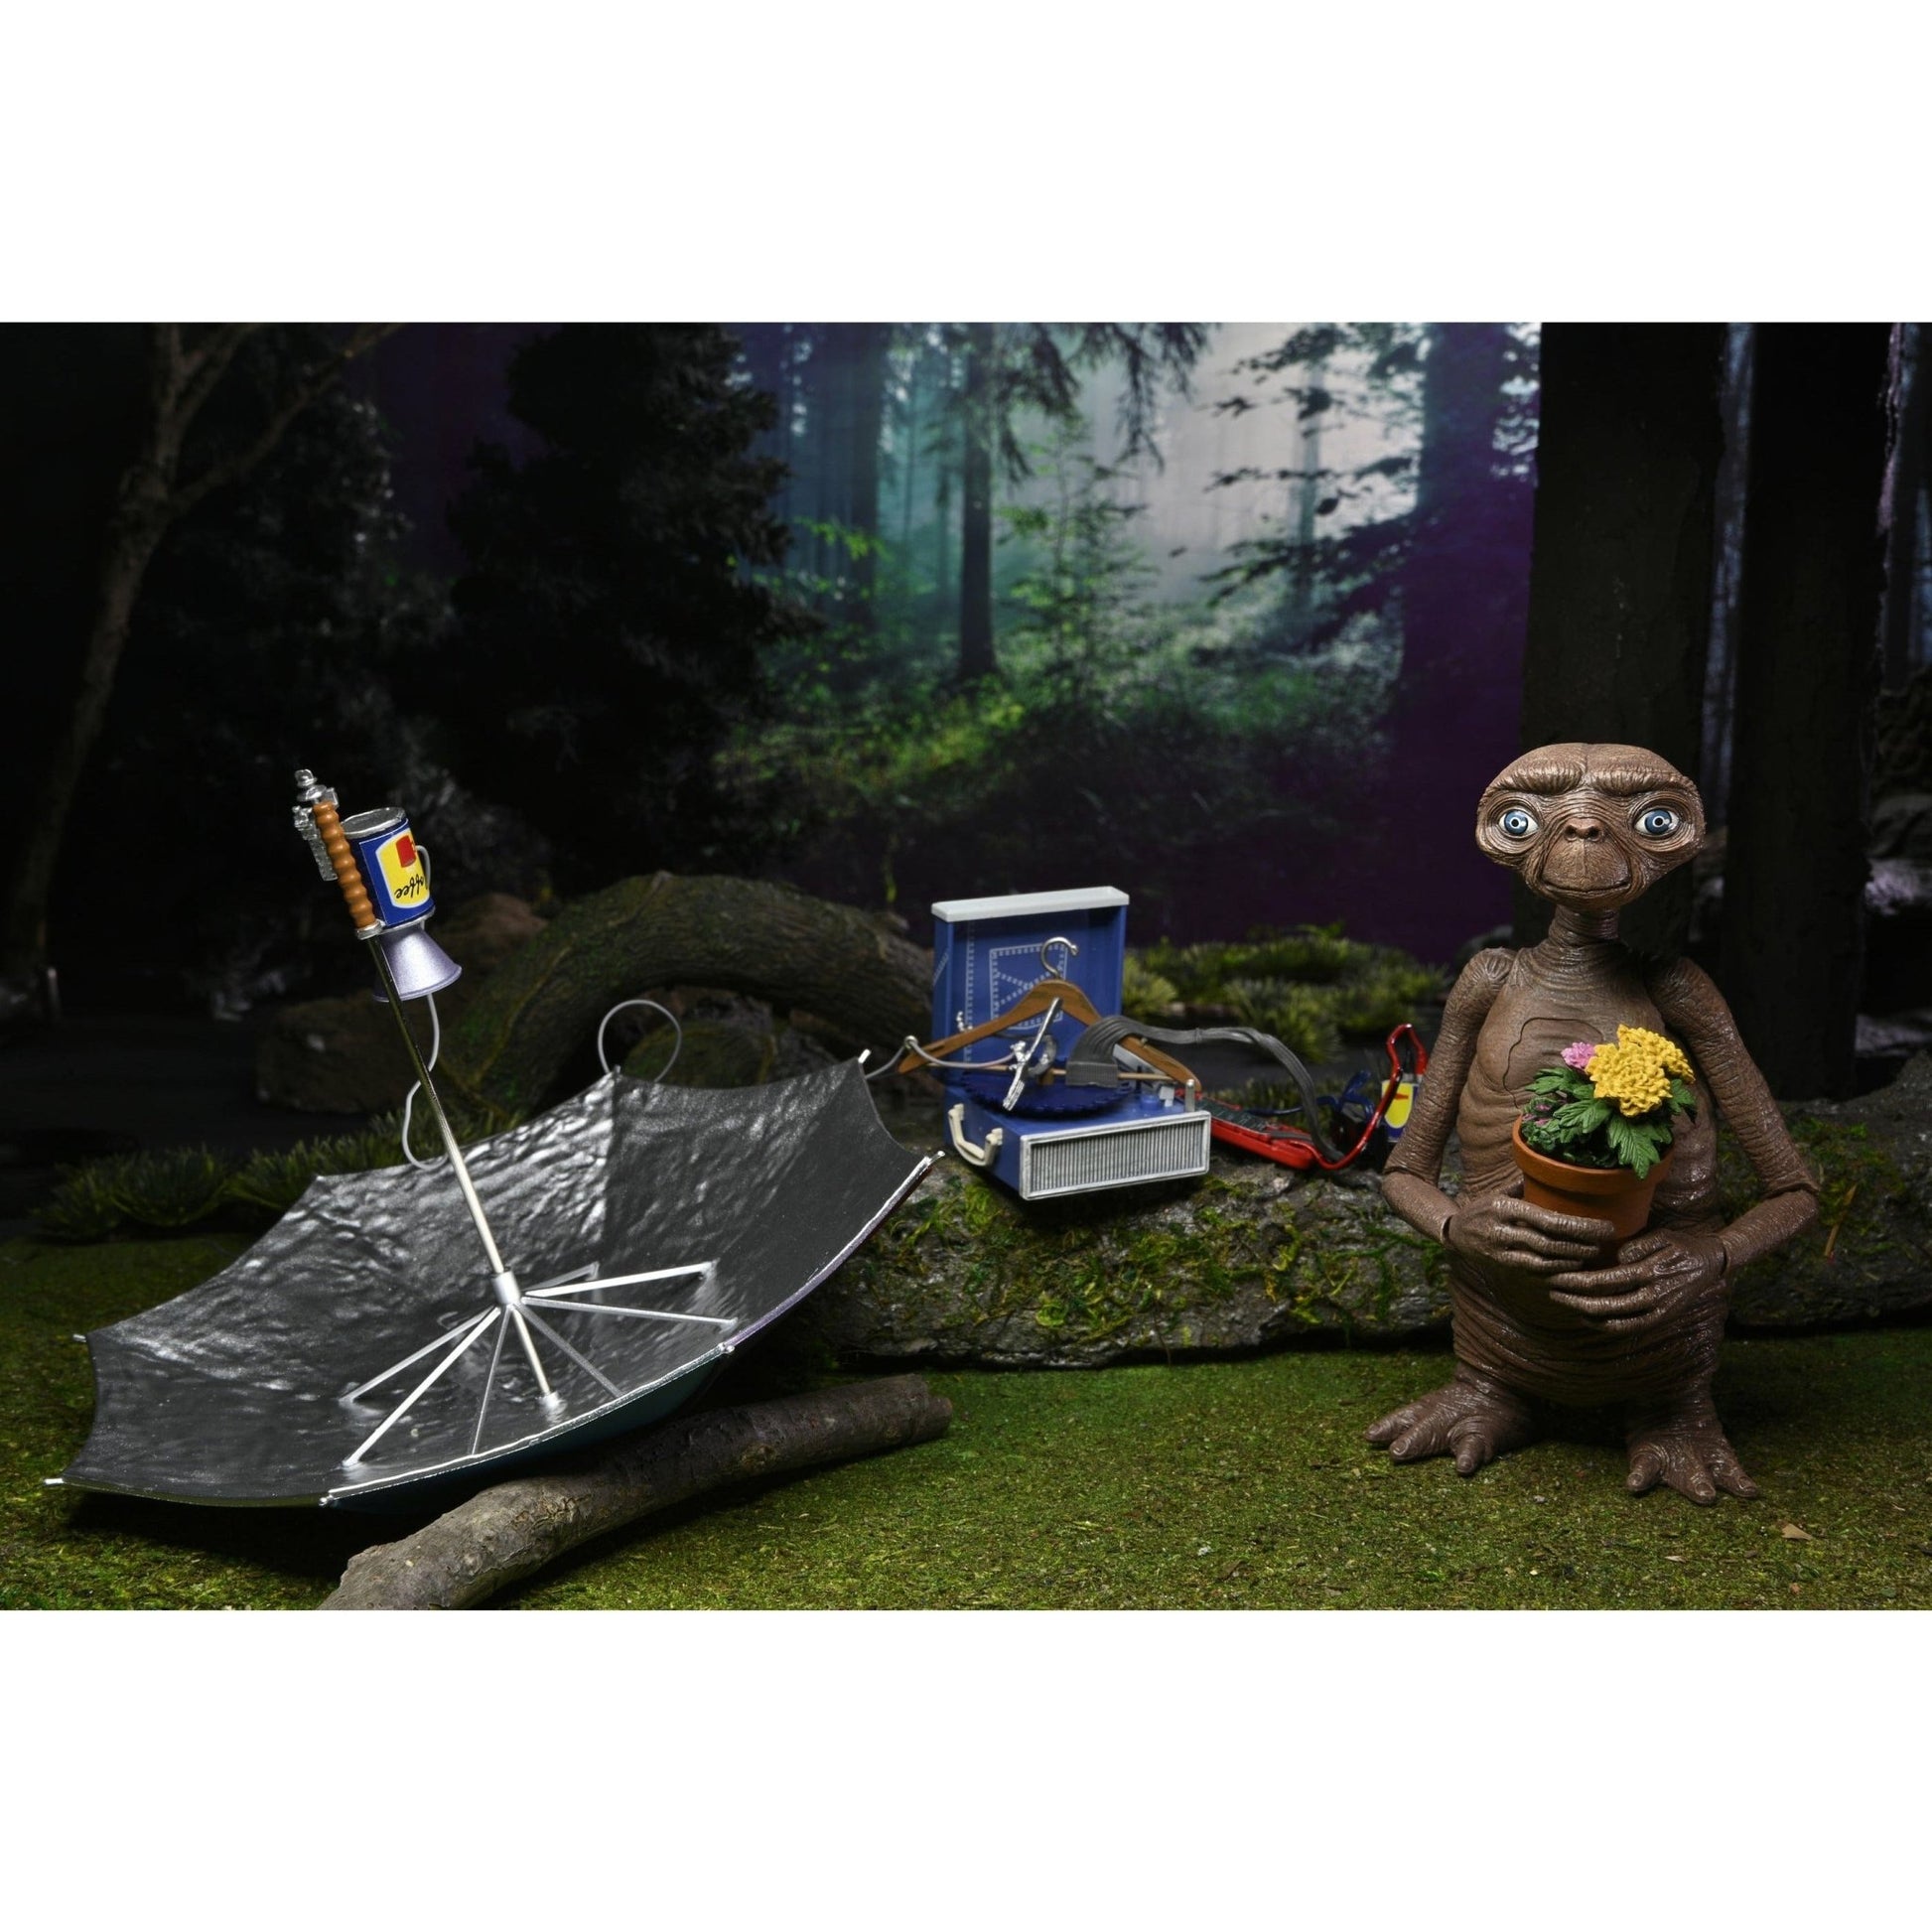 NECA E.T. The Extra Terrestrial Ultimate 7 Inch Action Figure w/LED Chest 40th Anniversary - Redshift7toys.com